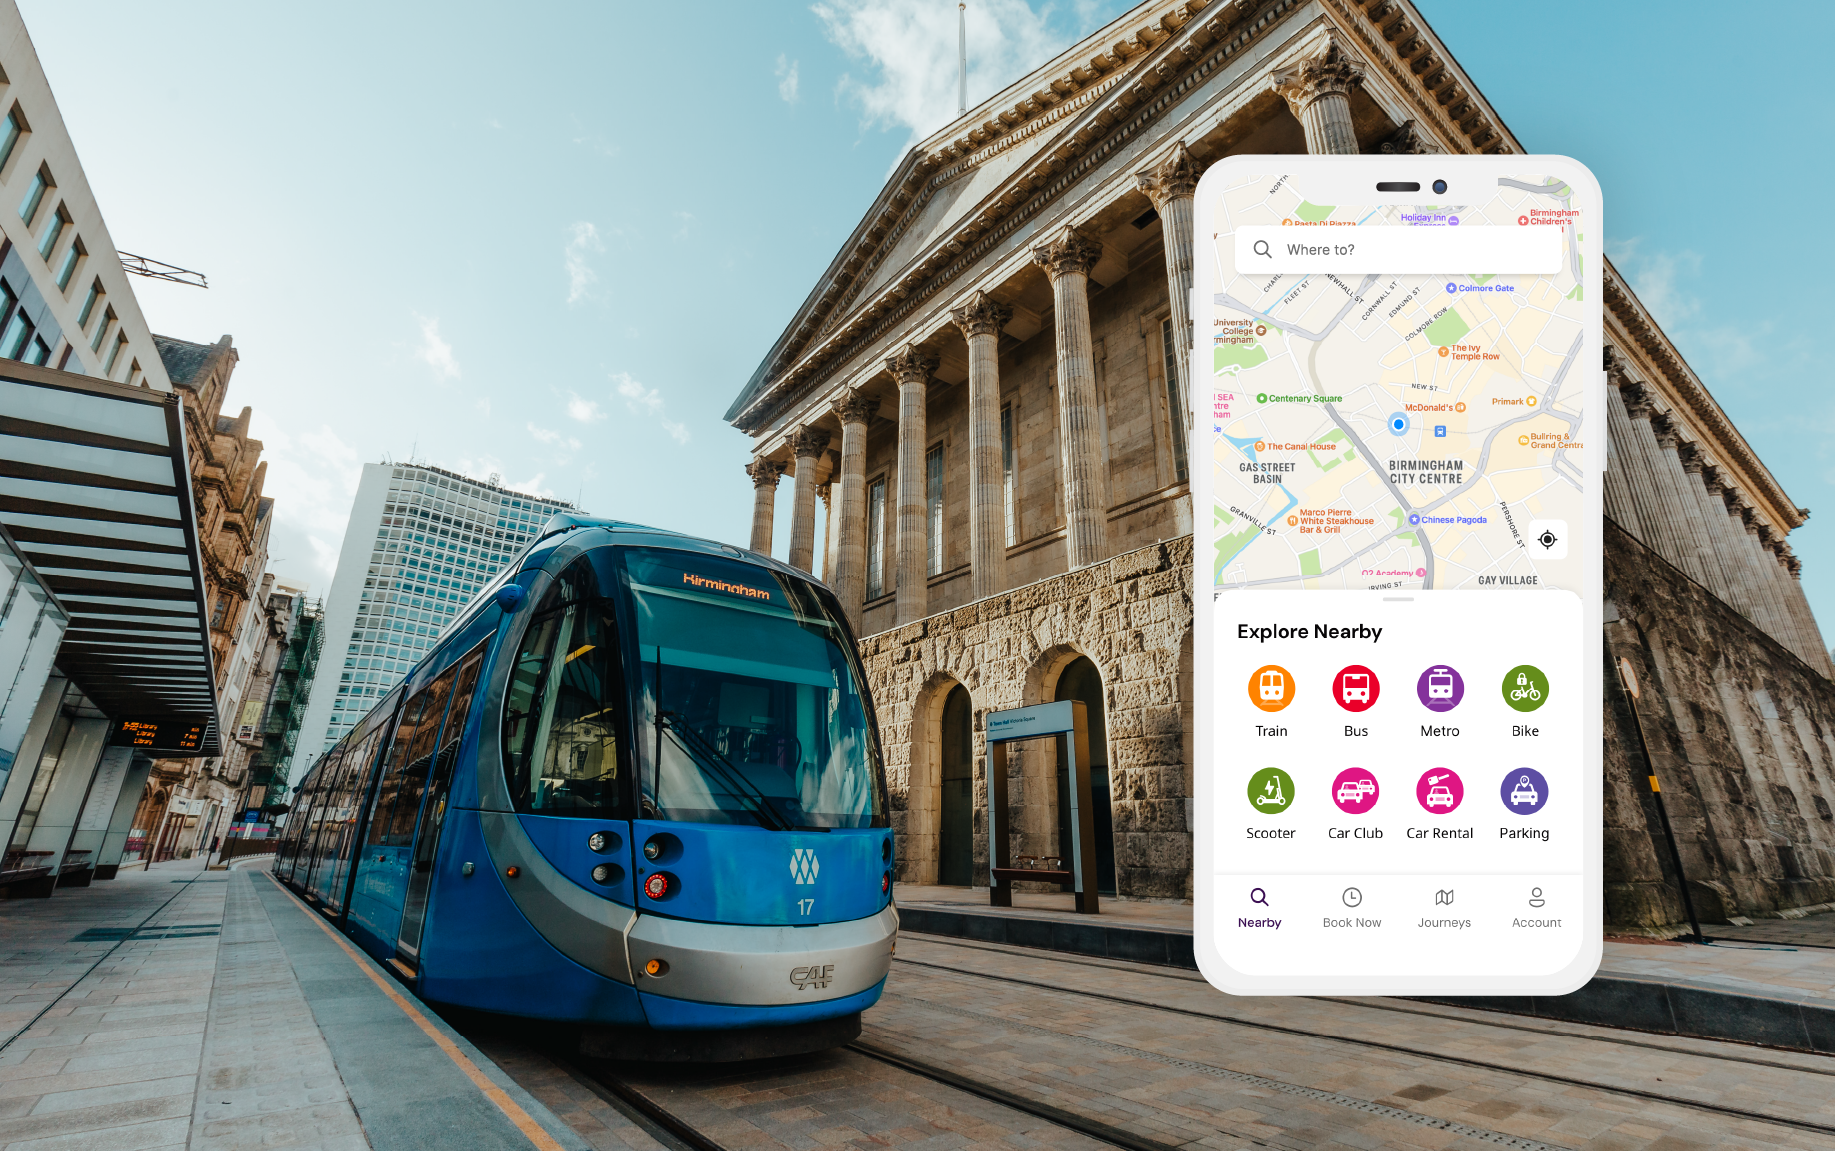 Picture of a tram in Birmingham City Centre with a smartphone map app insert